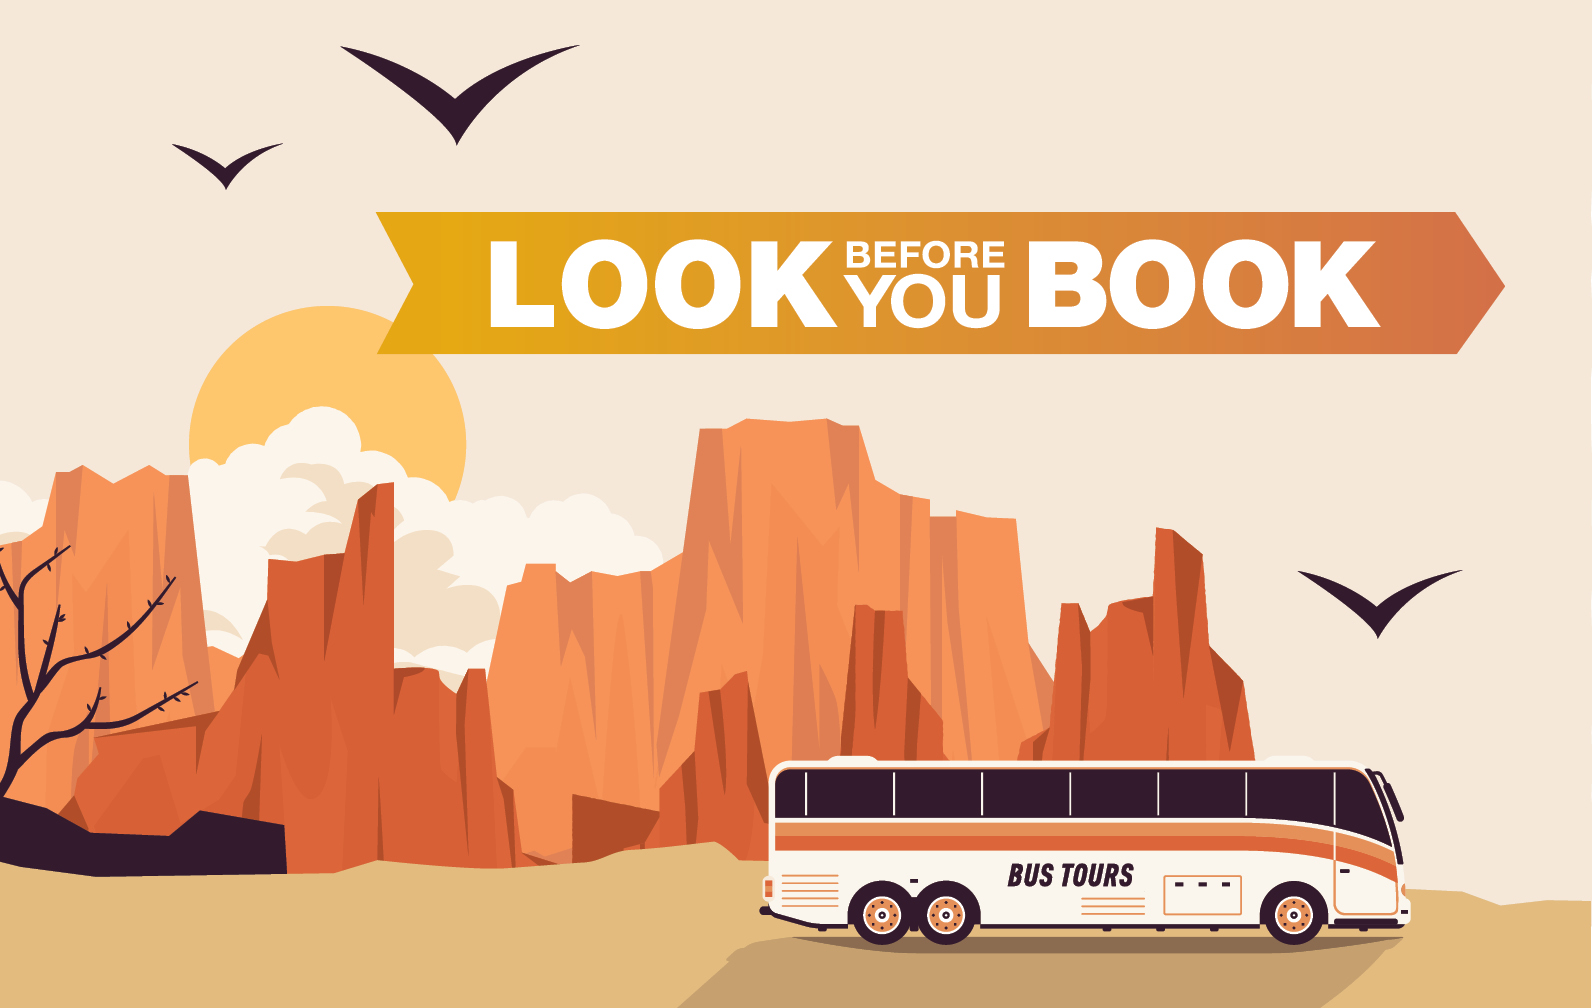 Look Before You Book 